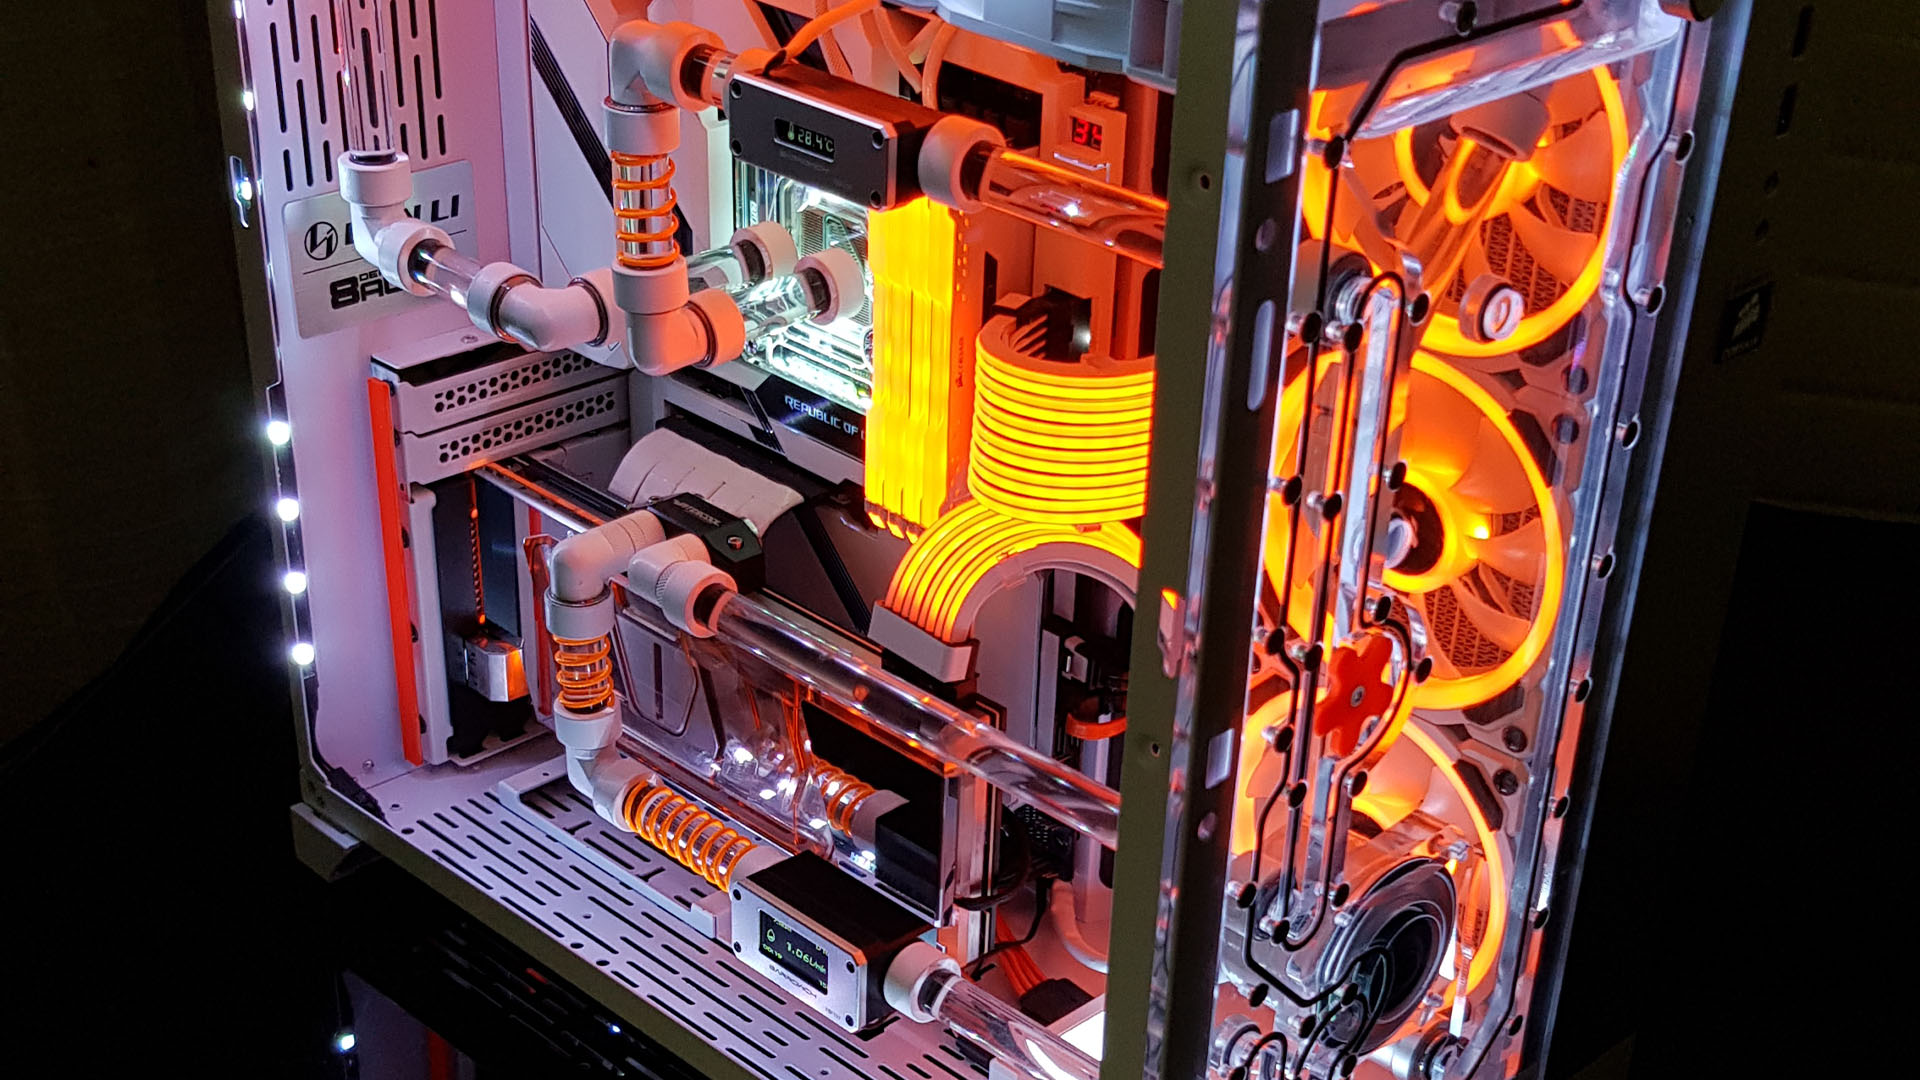 A close up of the internals of the star wars gaming PC, which features oange cables, RGB, and water-cooling